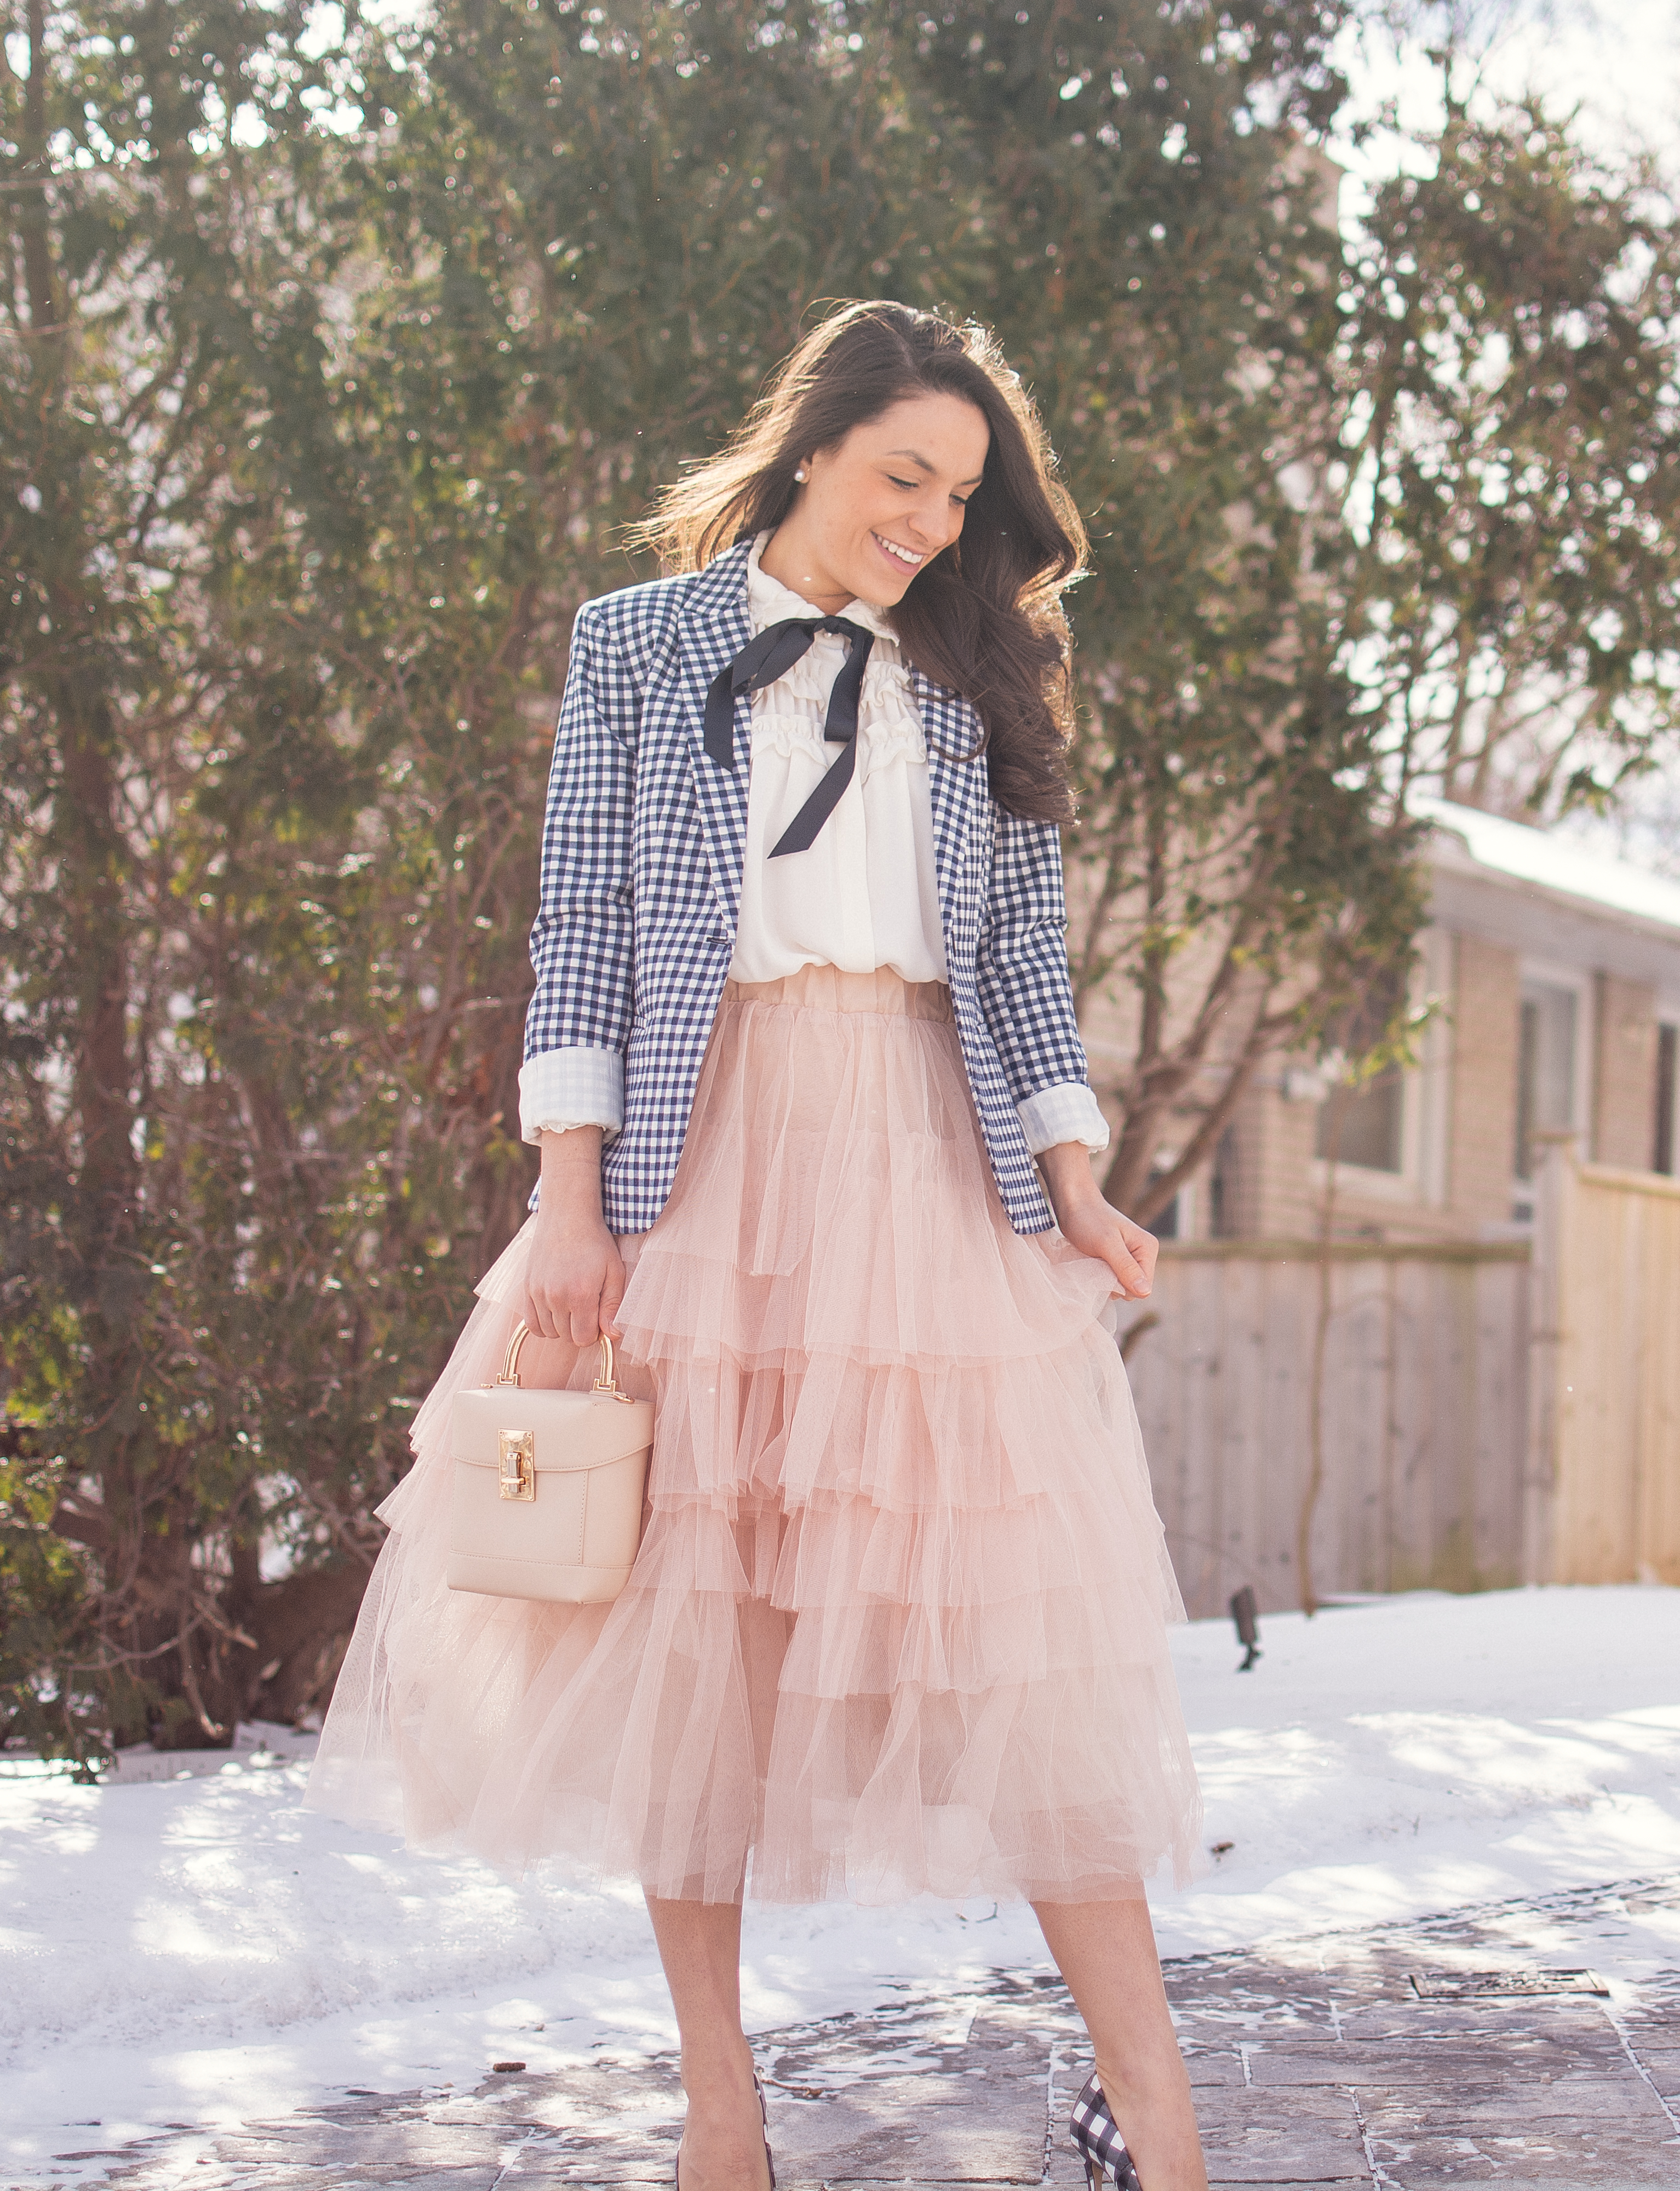 How to Wear a Tulle Skirt | The Pink Brunette | Tulle Skirts | How to Style Tulle skirts | Gingham Blazer 